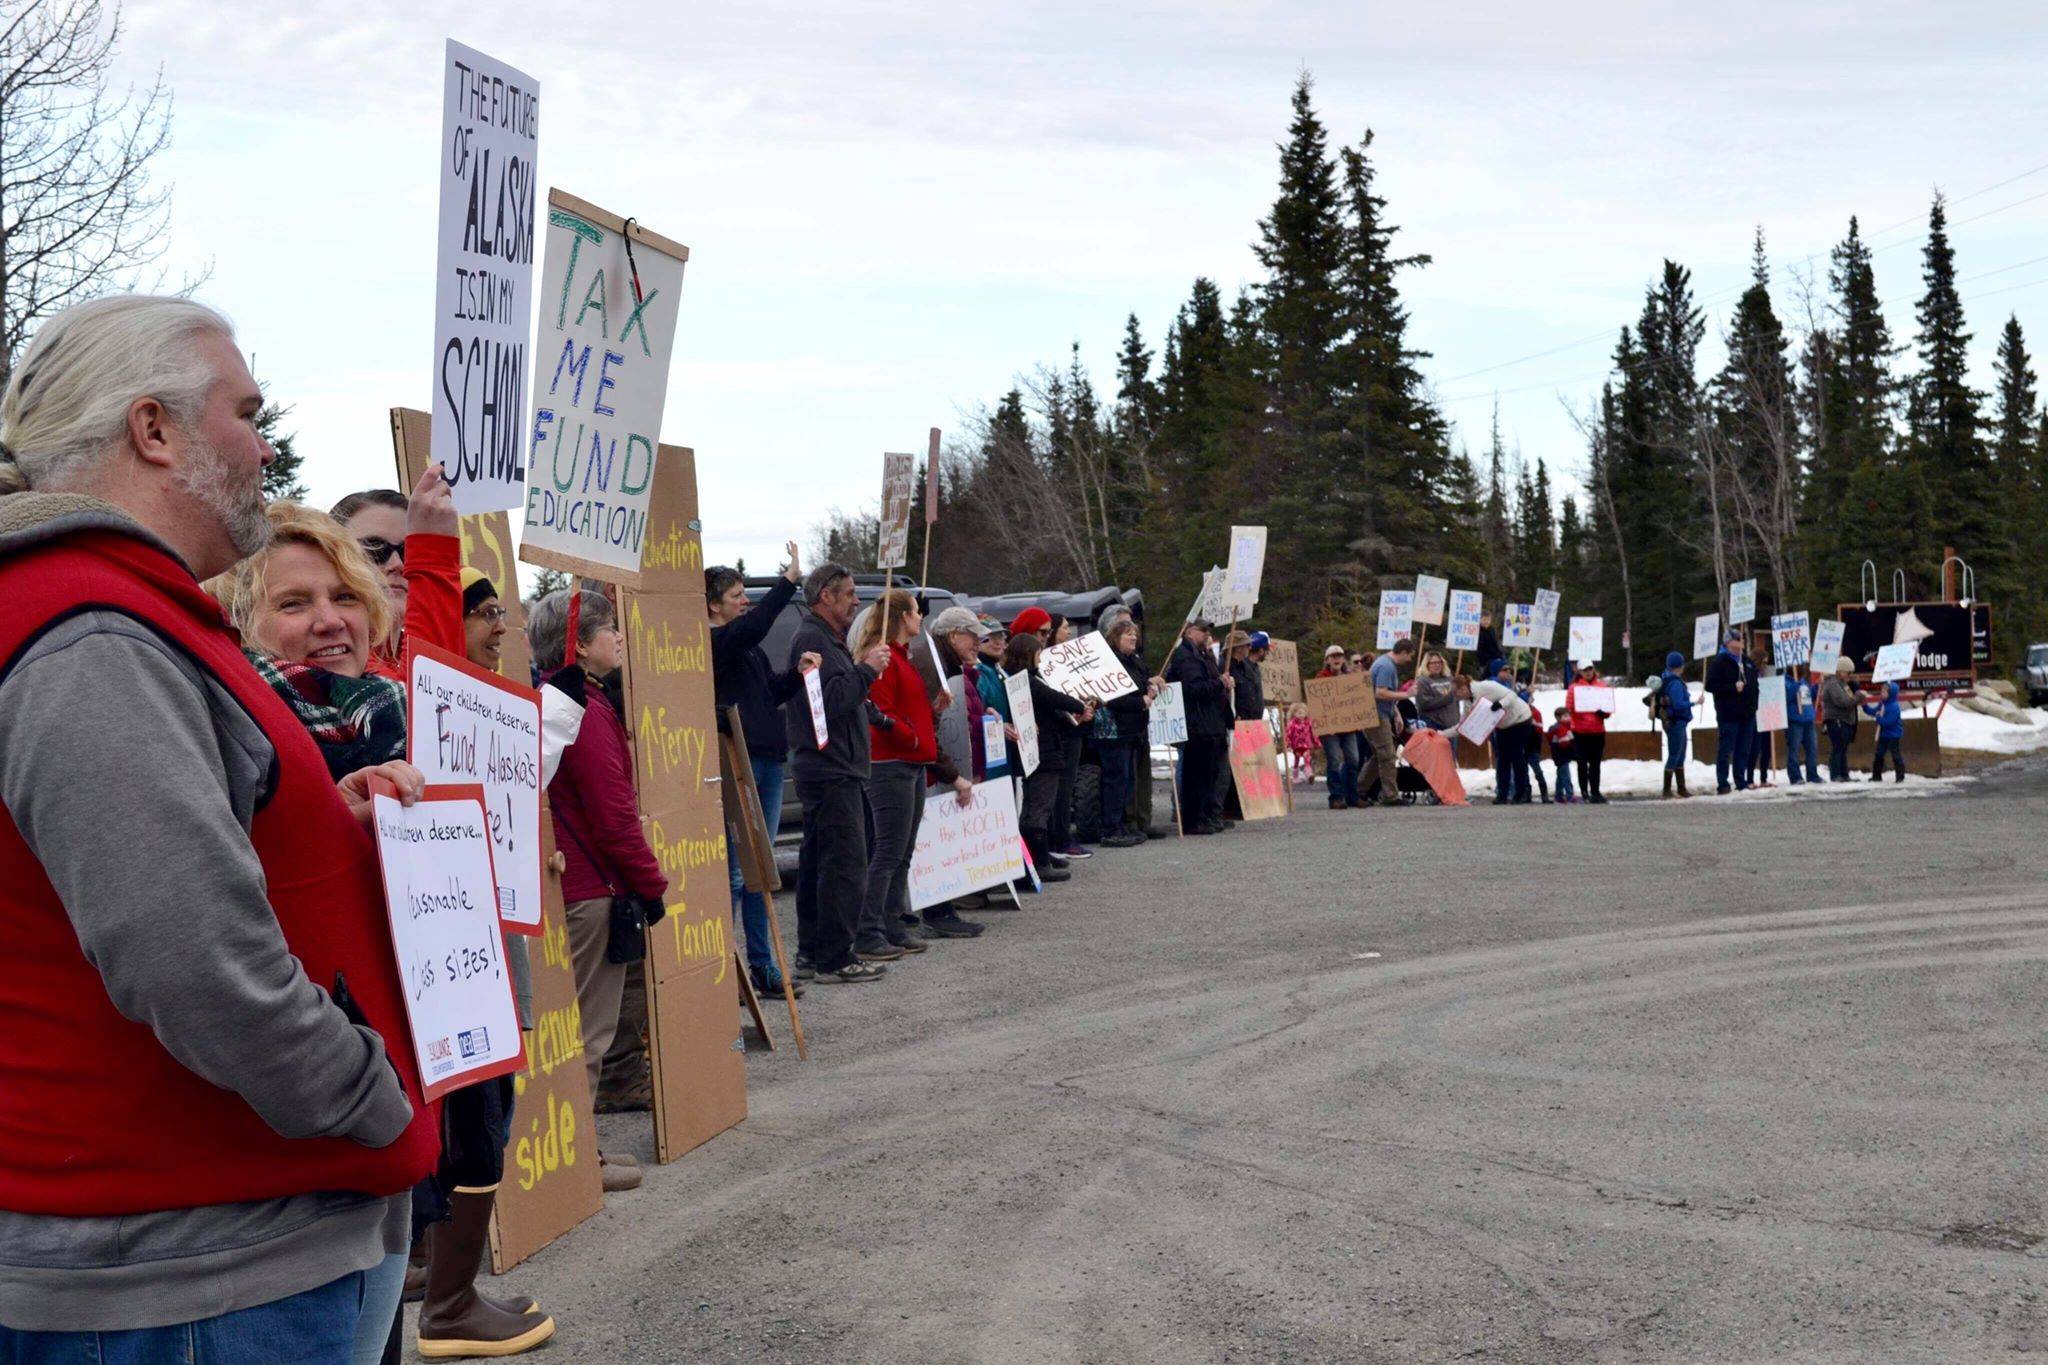 Protesters stand outside the Cannery Lodge in Kenai, Alaska, ahead of Gov. Mike Dunleavy’s presentation about his proposed budget on March 26, 2019. (Photo by Victoria Petersen/Peninsula Clarion)